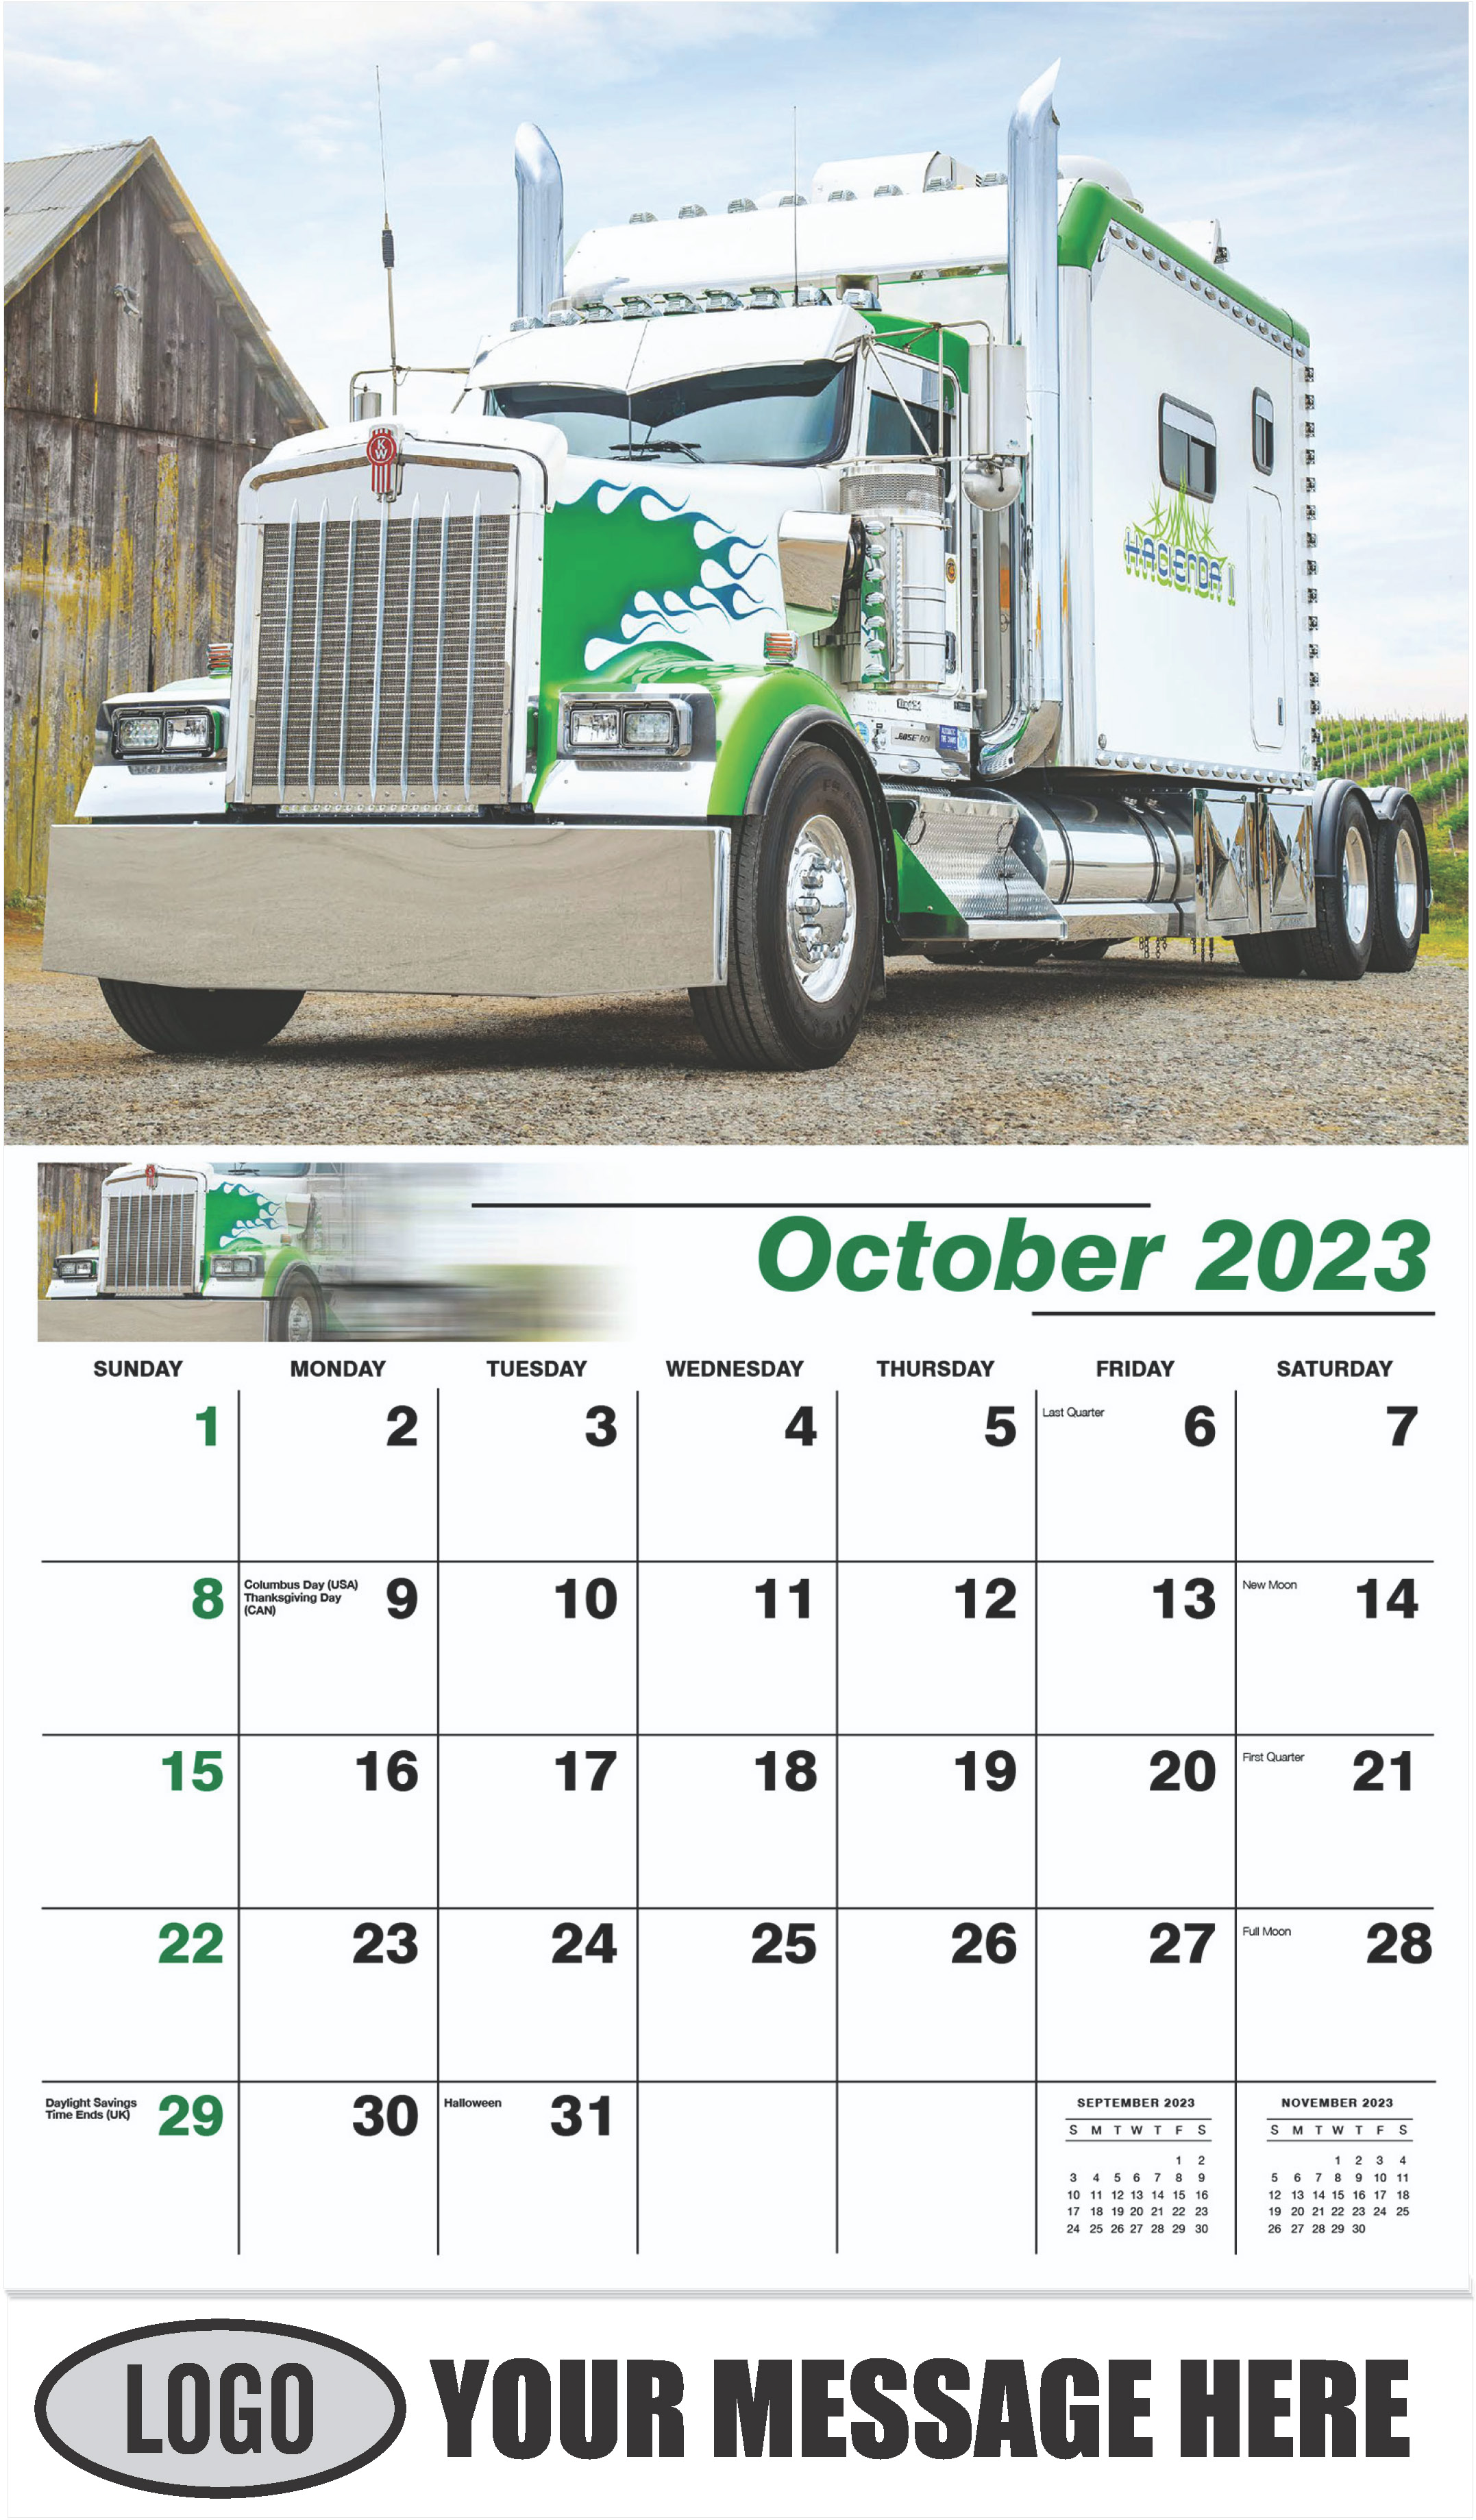 2007 Kenworth W900L - October - Kings of the Road 2023 Promotional Calendar